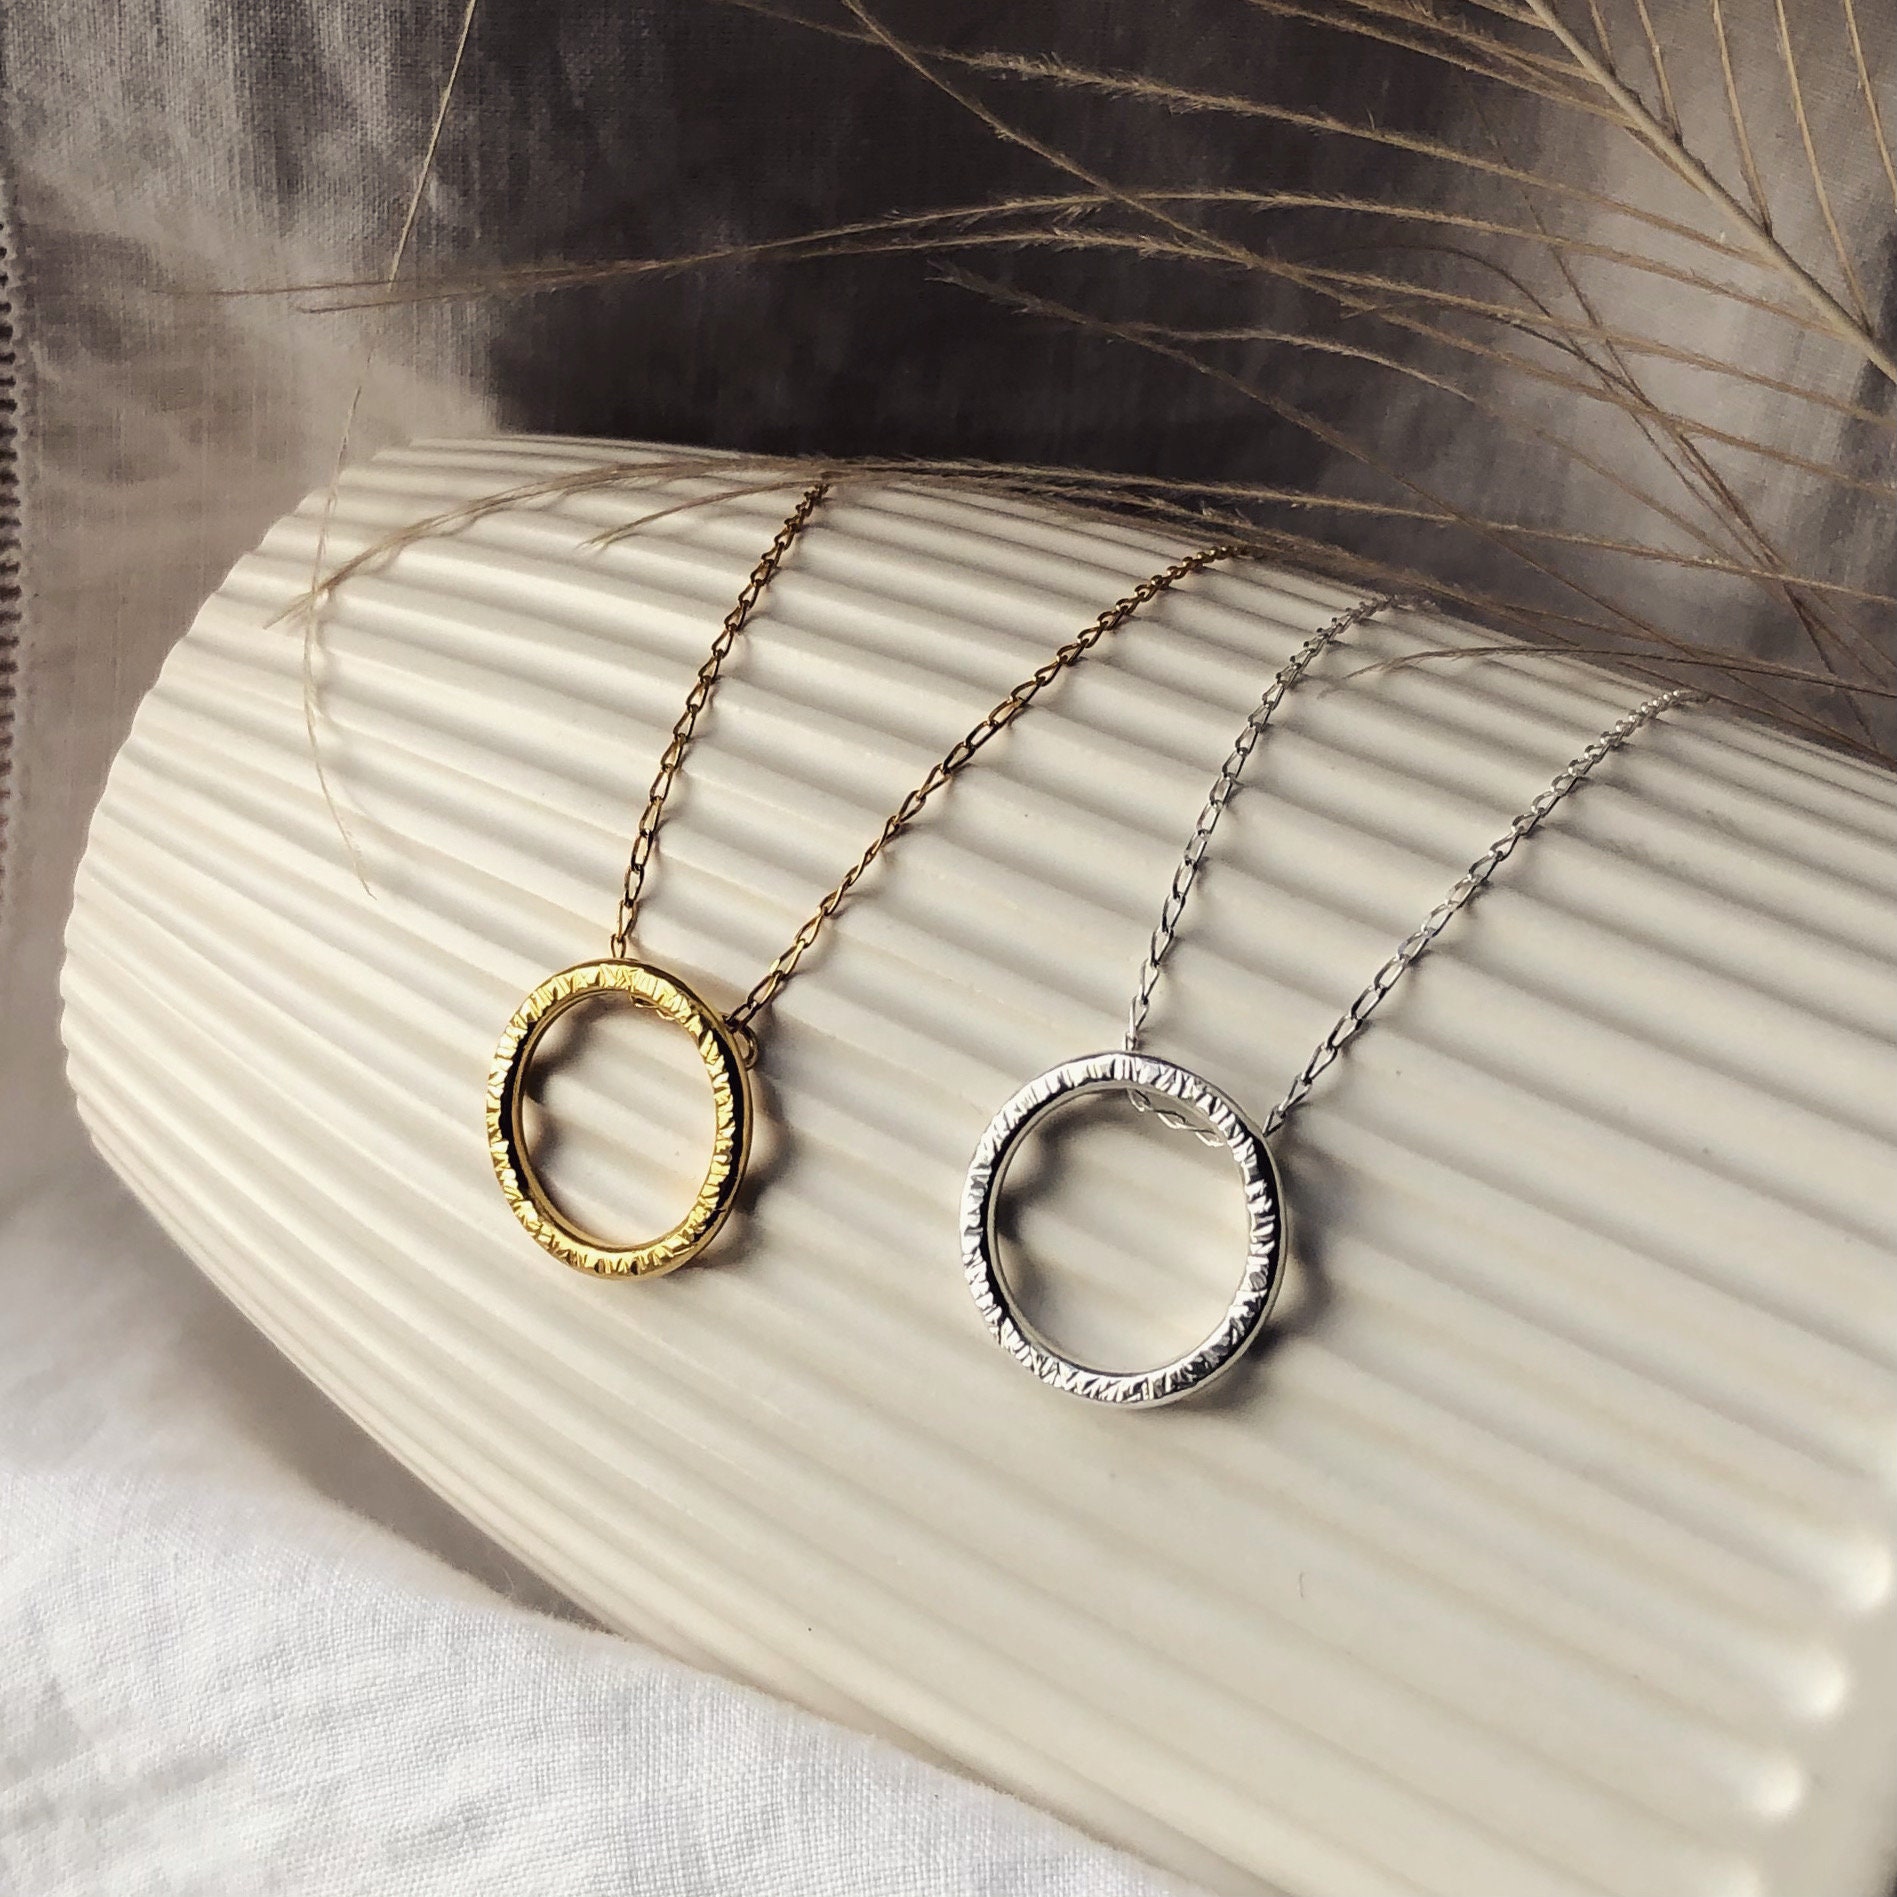 Eternity Circle Necklace With Delicate Textured Surface | Sustainably Handmade & Perfect For Gifting